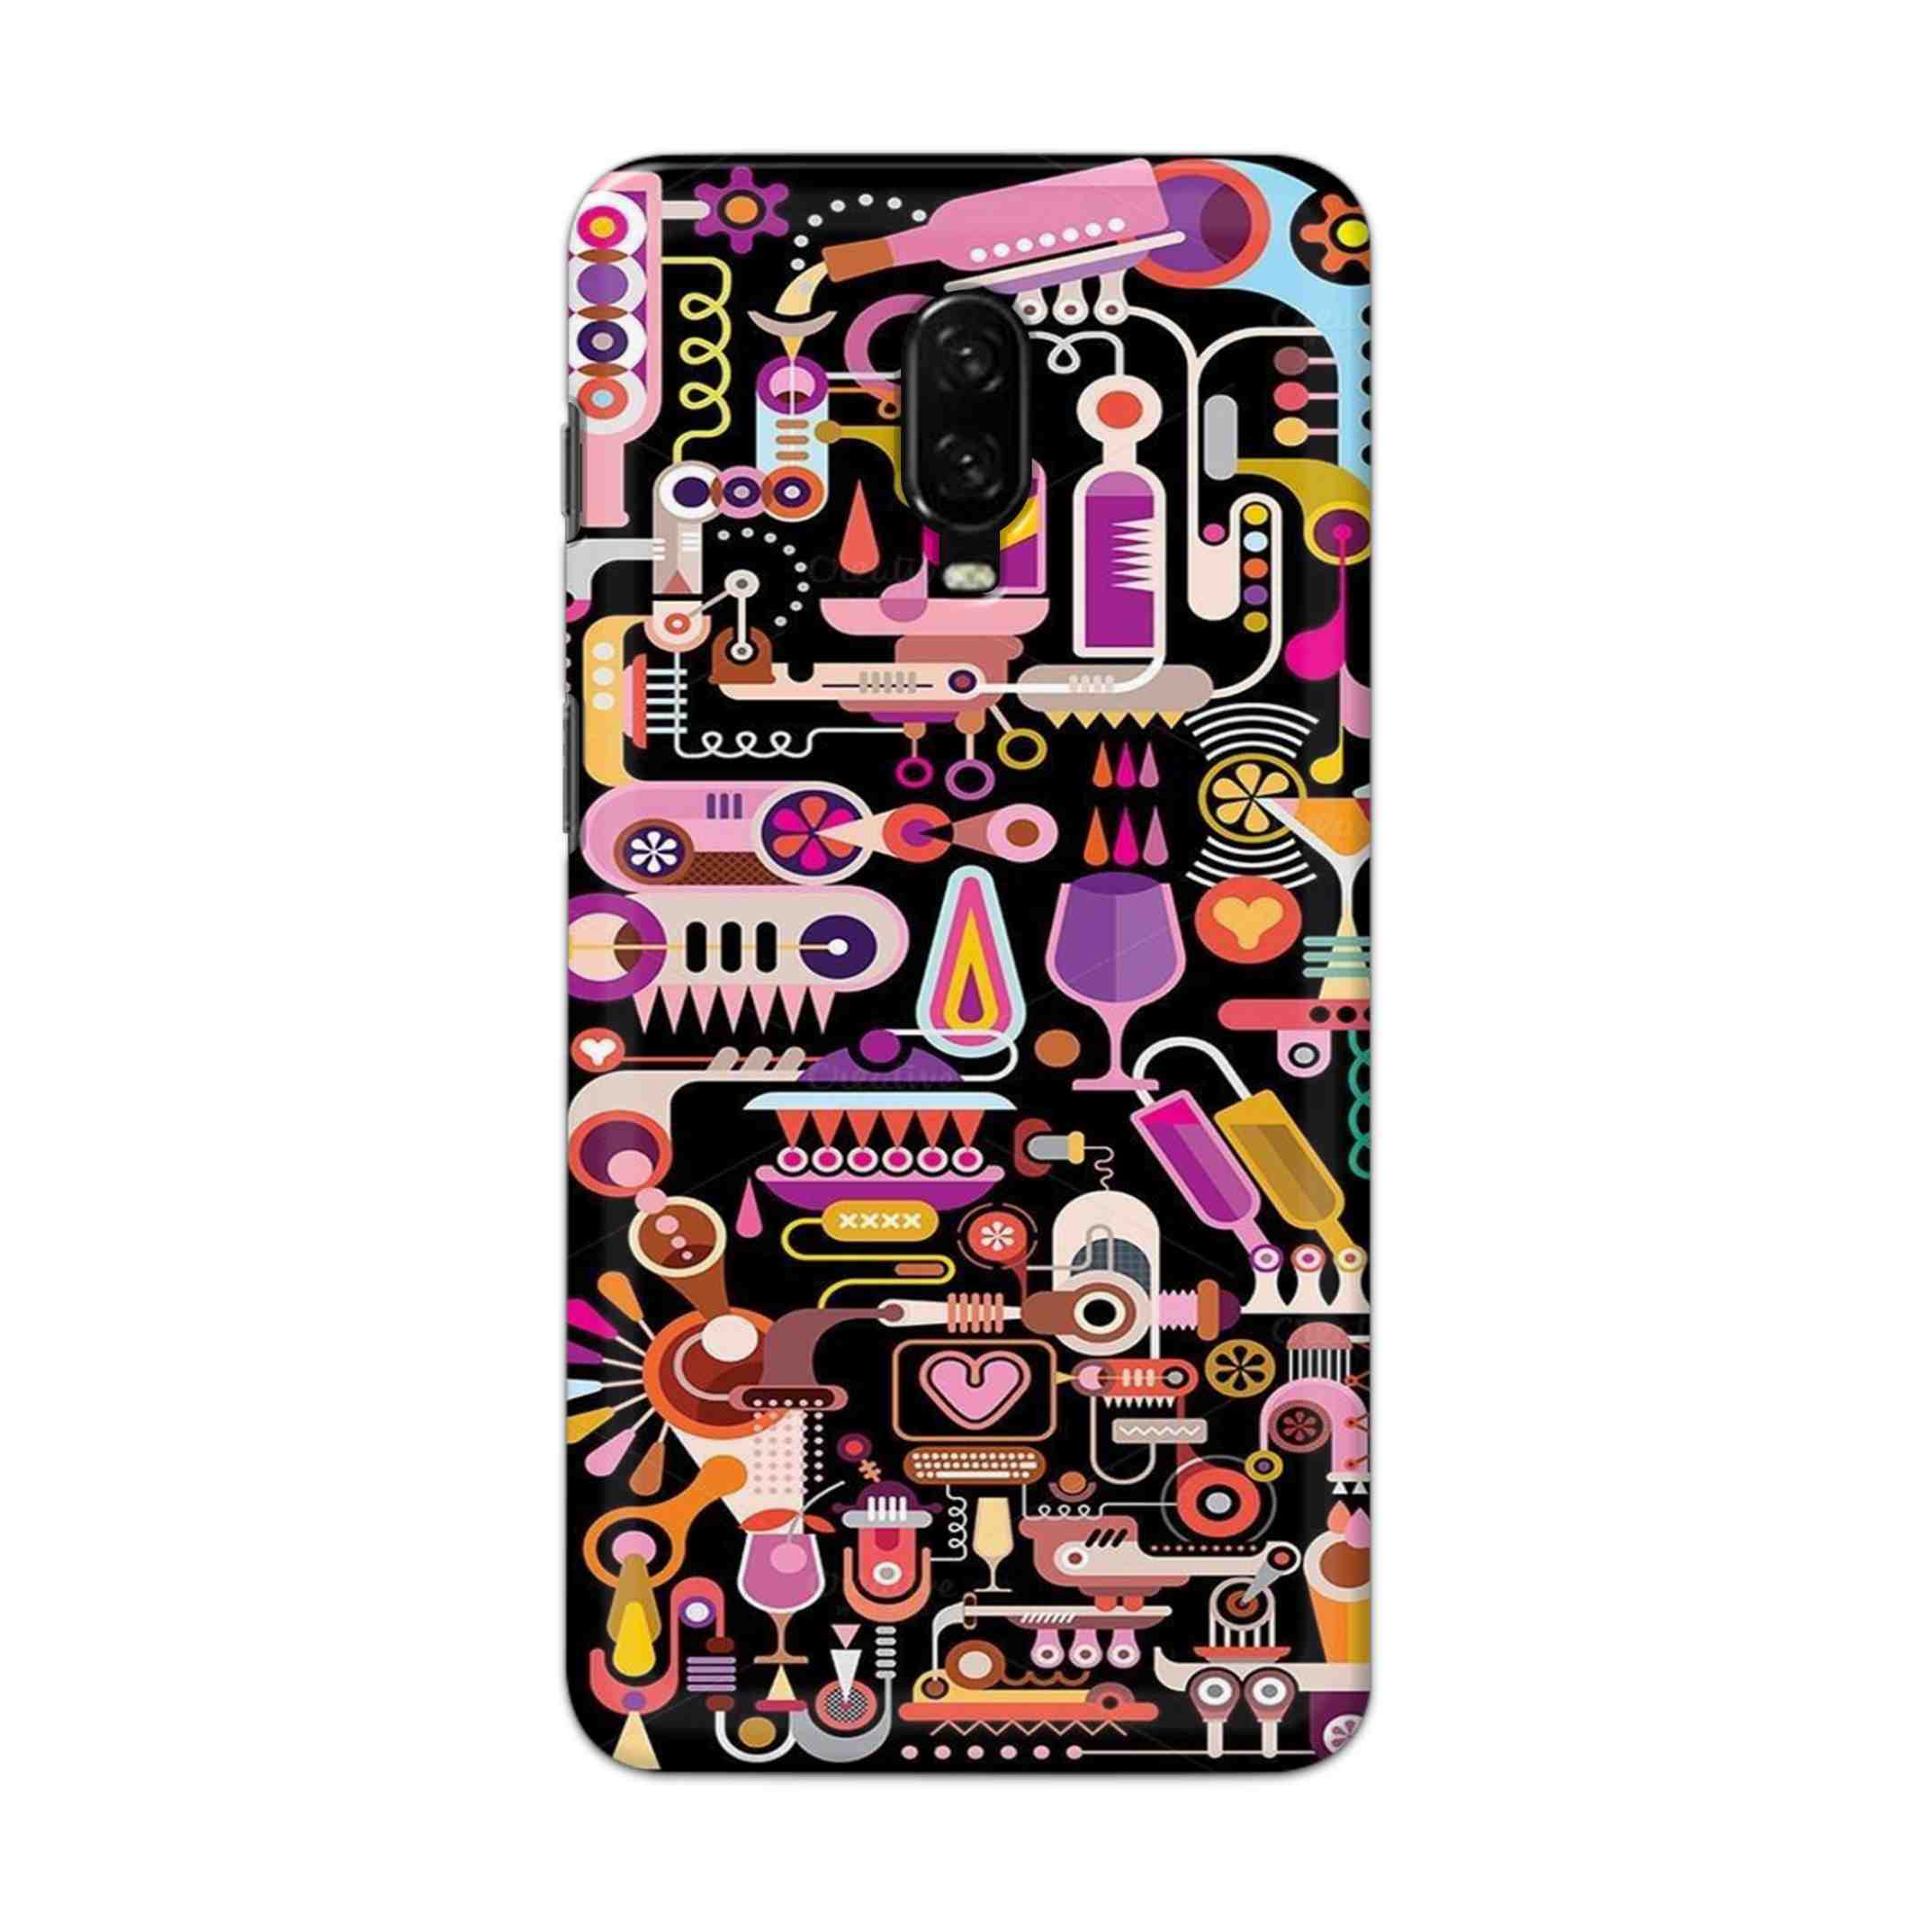 Buy Lab Art Hard Back Mobile Phone Case Cover For OnePlus 6T Online